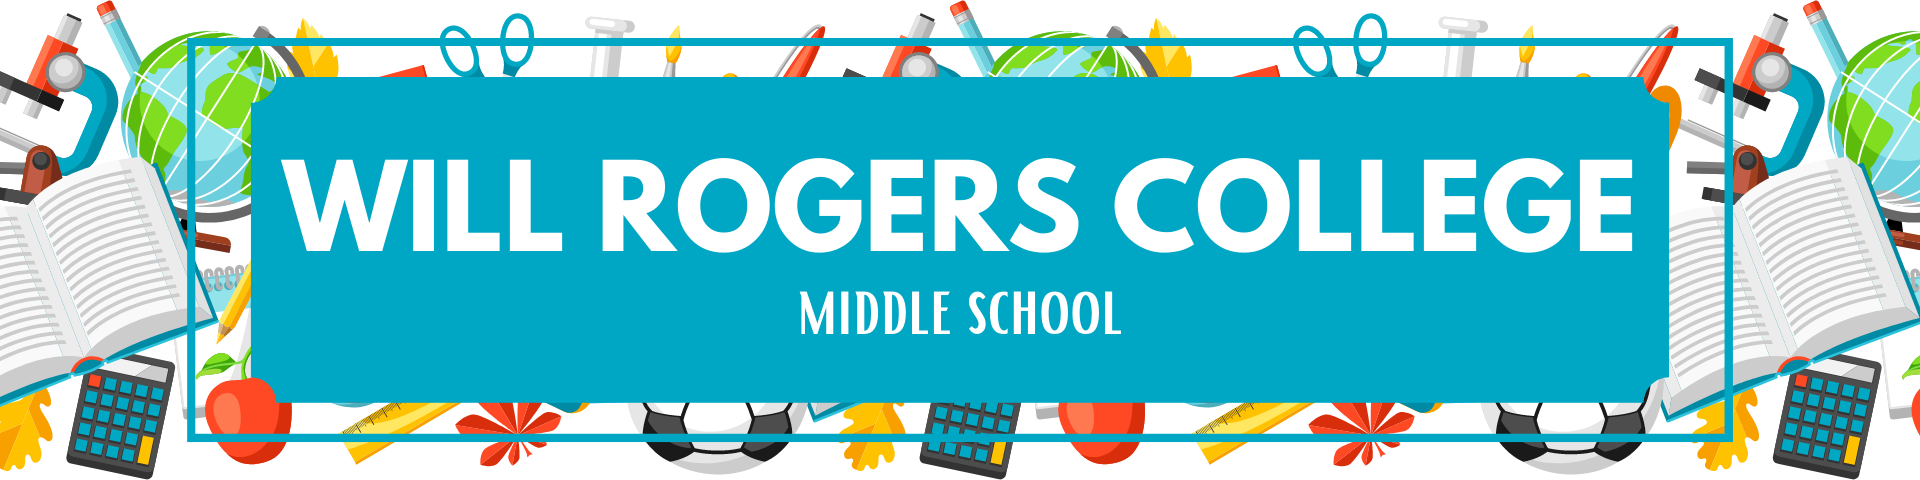 Will Rogers Middle